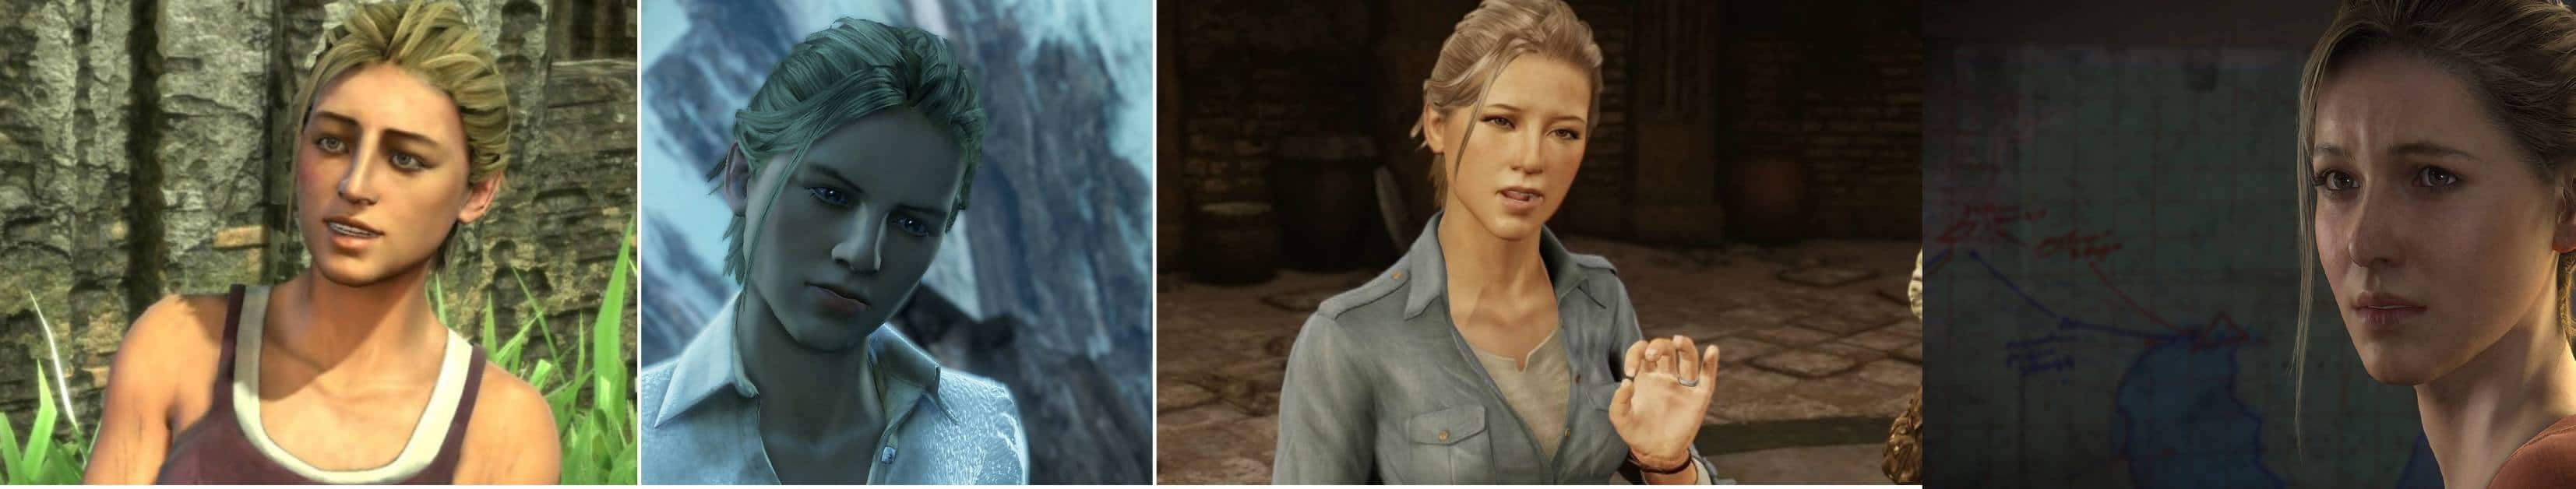 The Evolution of Uncharted characters